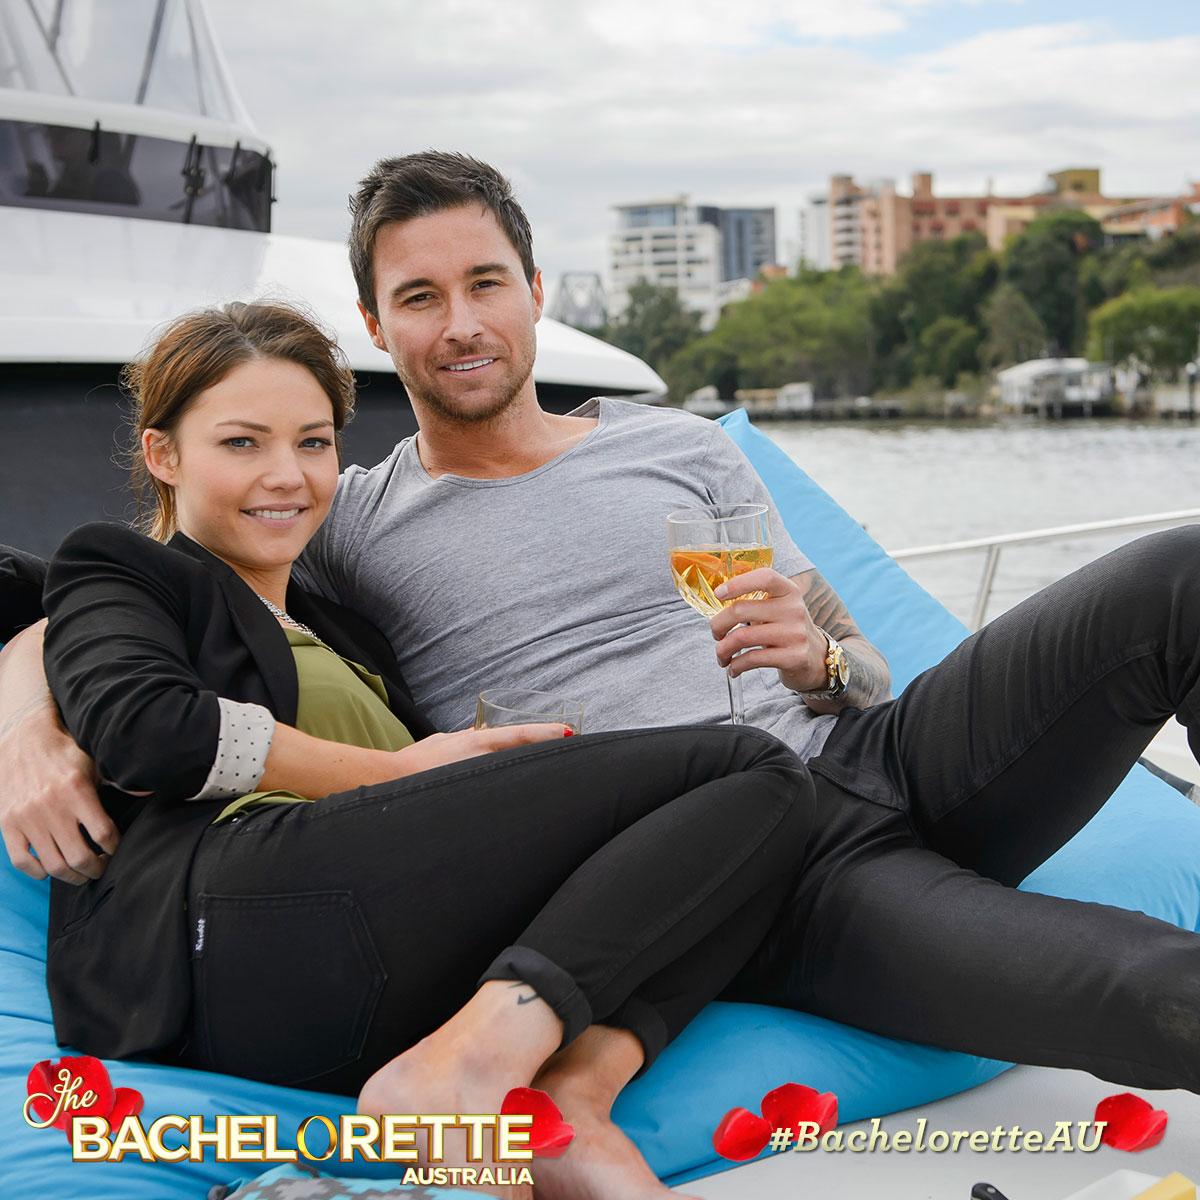 The Bachelorette Australia - Michael Turnbull - *Sleuthing Spoilers*  - Page 18 CRYio-xUEAE_d8K